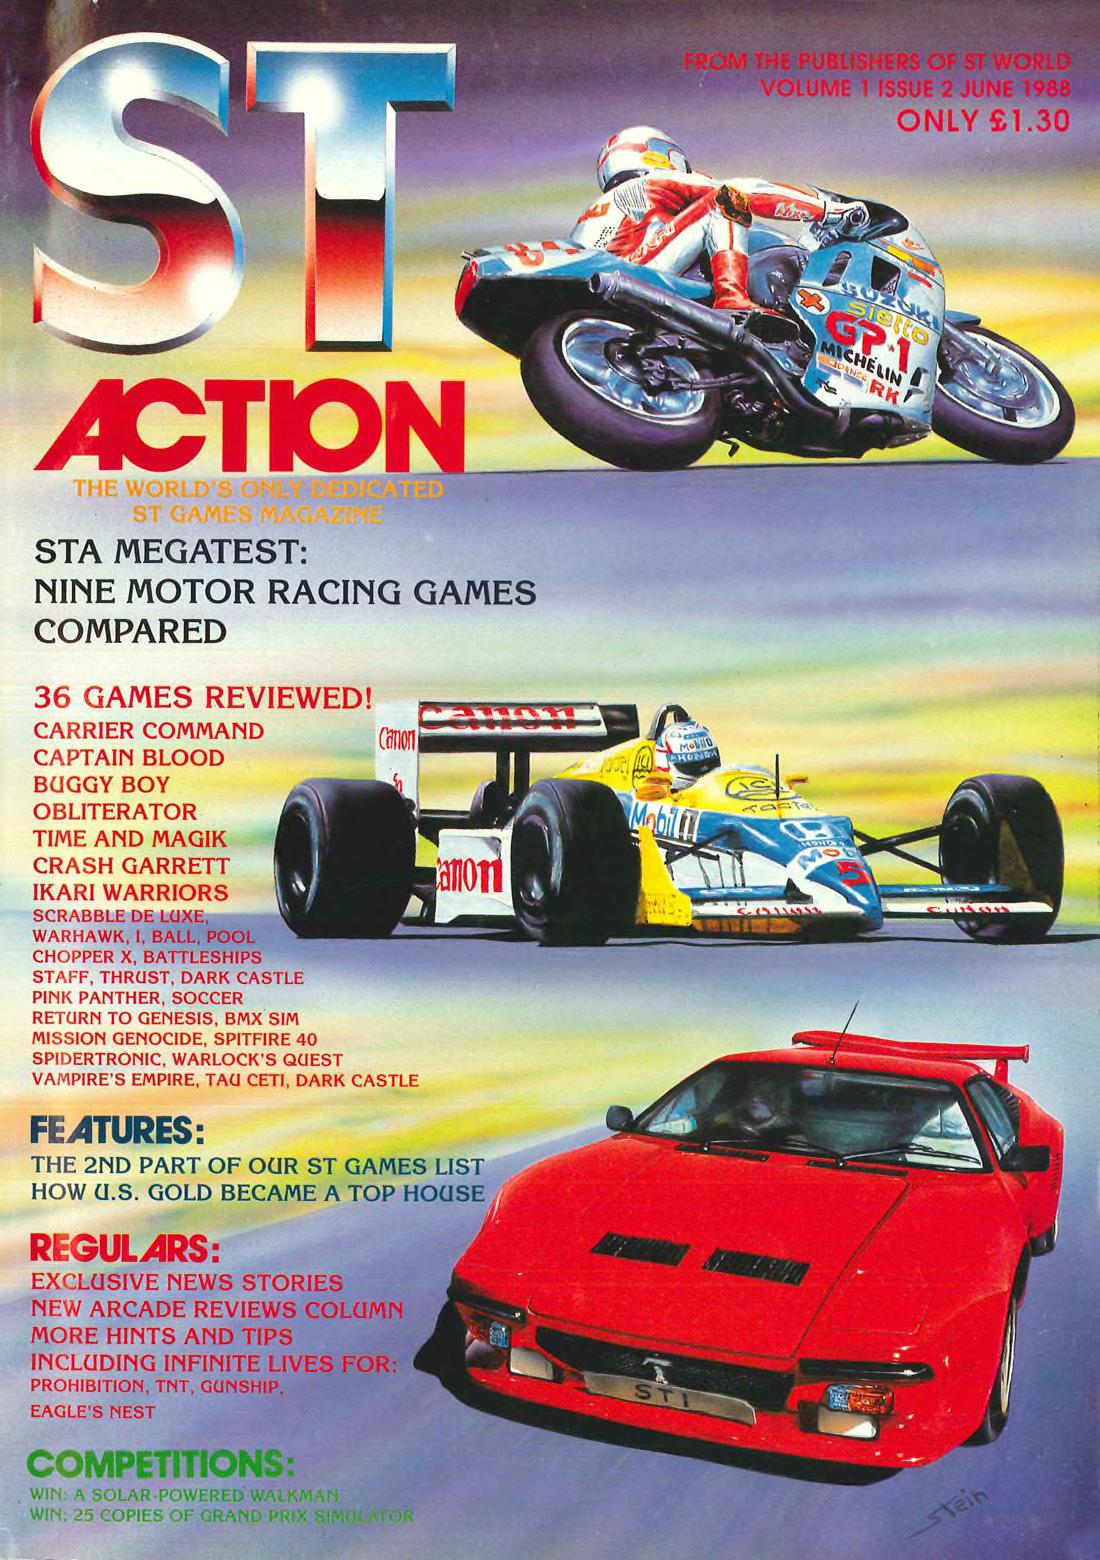 Cover for ST Action 2 Volume 1 Issue 2 (Jun 1998)